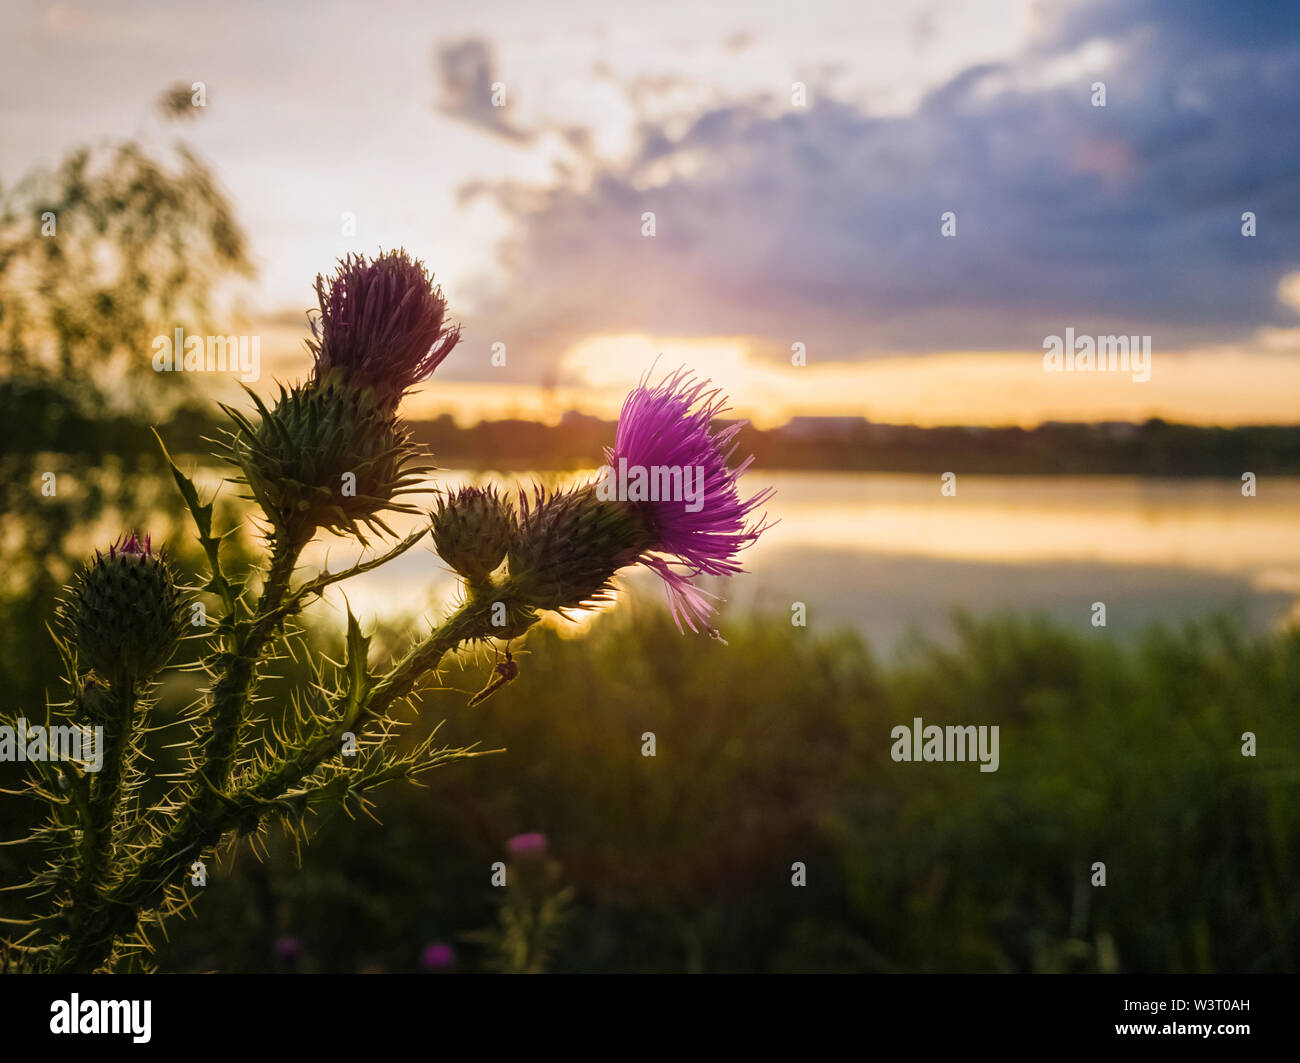 Closeup spear thistle purple flower over sunset sky and lake background. Cirsium vulgare, plant with spine and needles tipped winged stems and leaves, Stock Photo